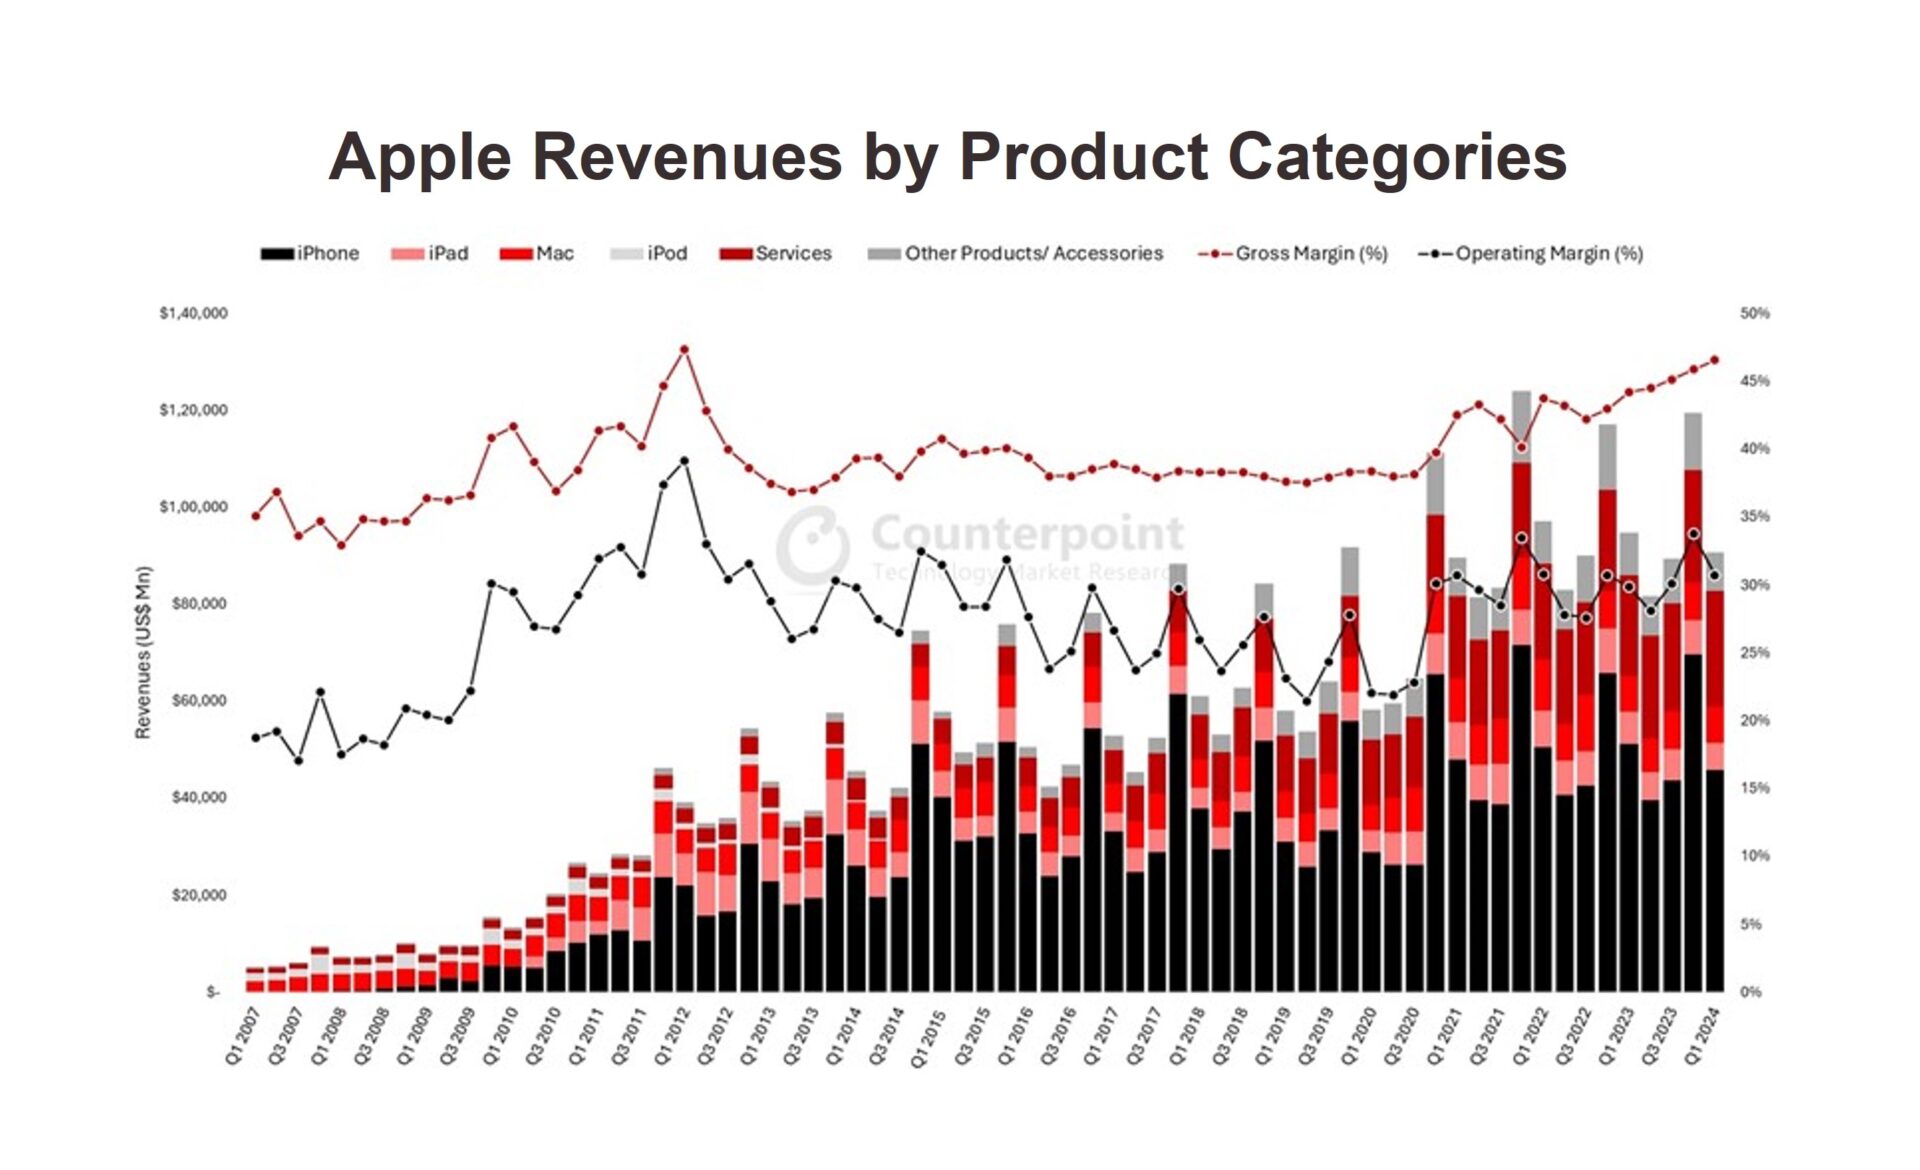 Apple’s Services Revenue Grows to Reach Highest Ever Share as Product Revenues Decline